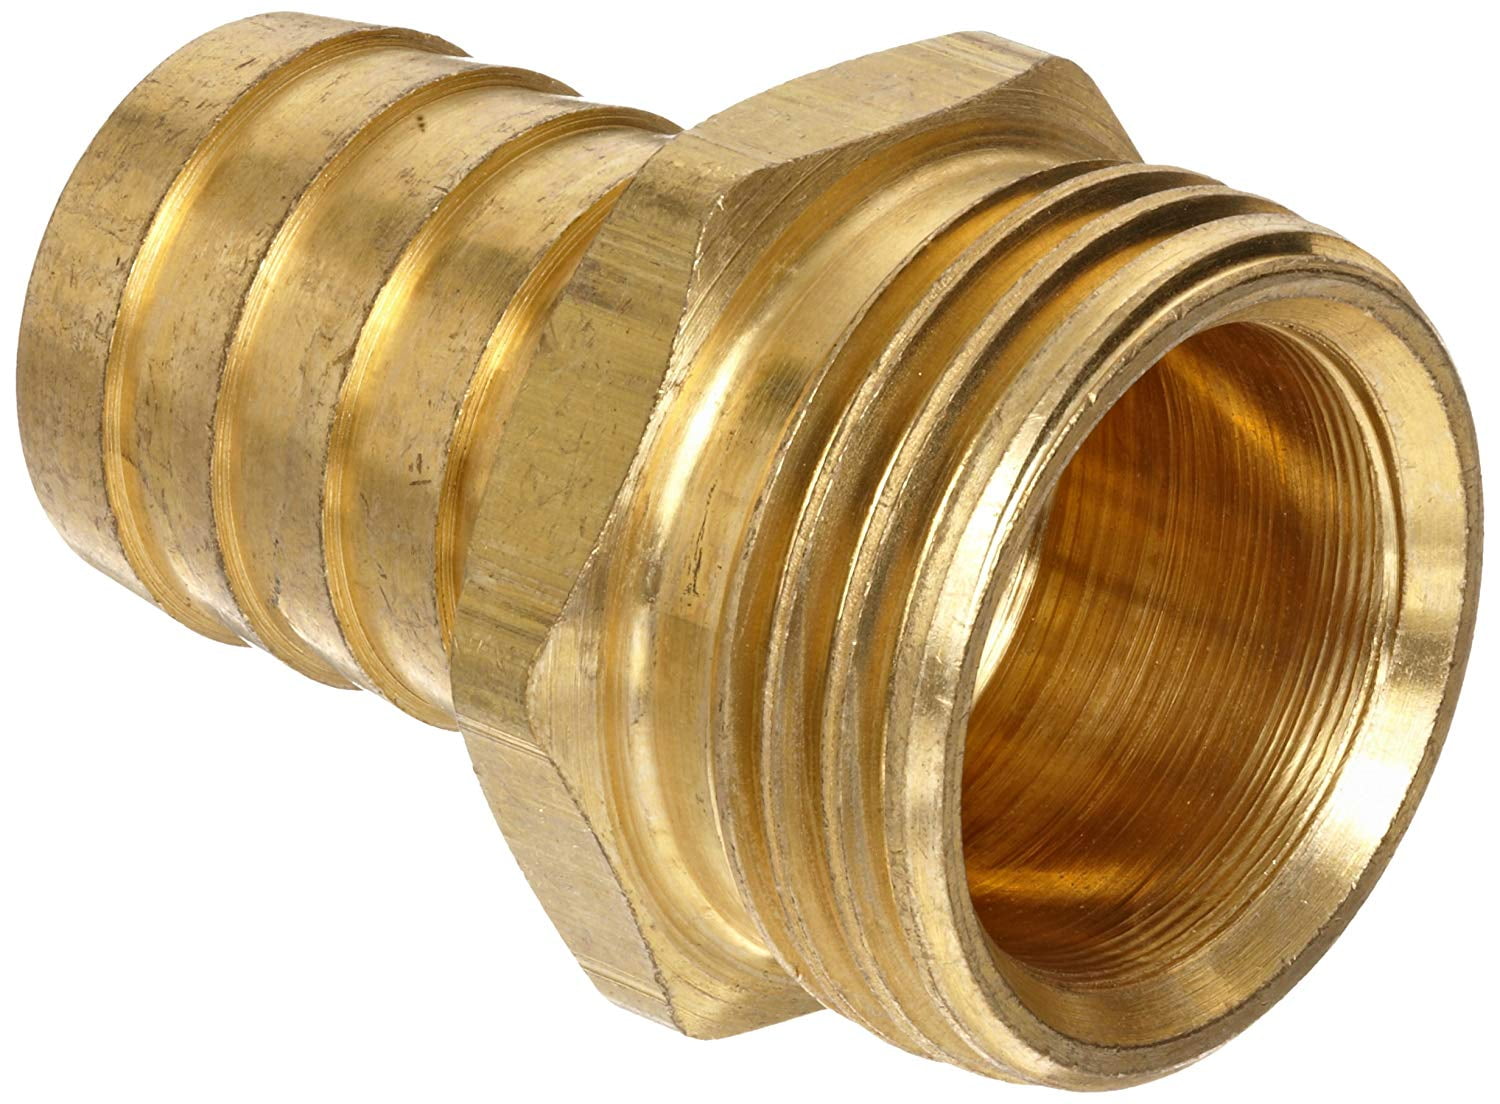 Anderson Metals Brass Push-On Hose Fitting Elbow 1/2 Barb x 1/2 Male Pipe